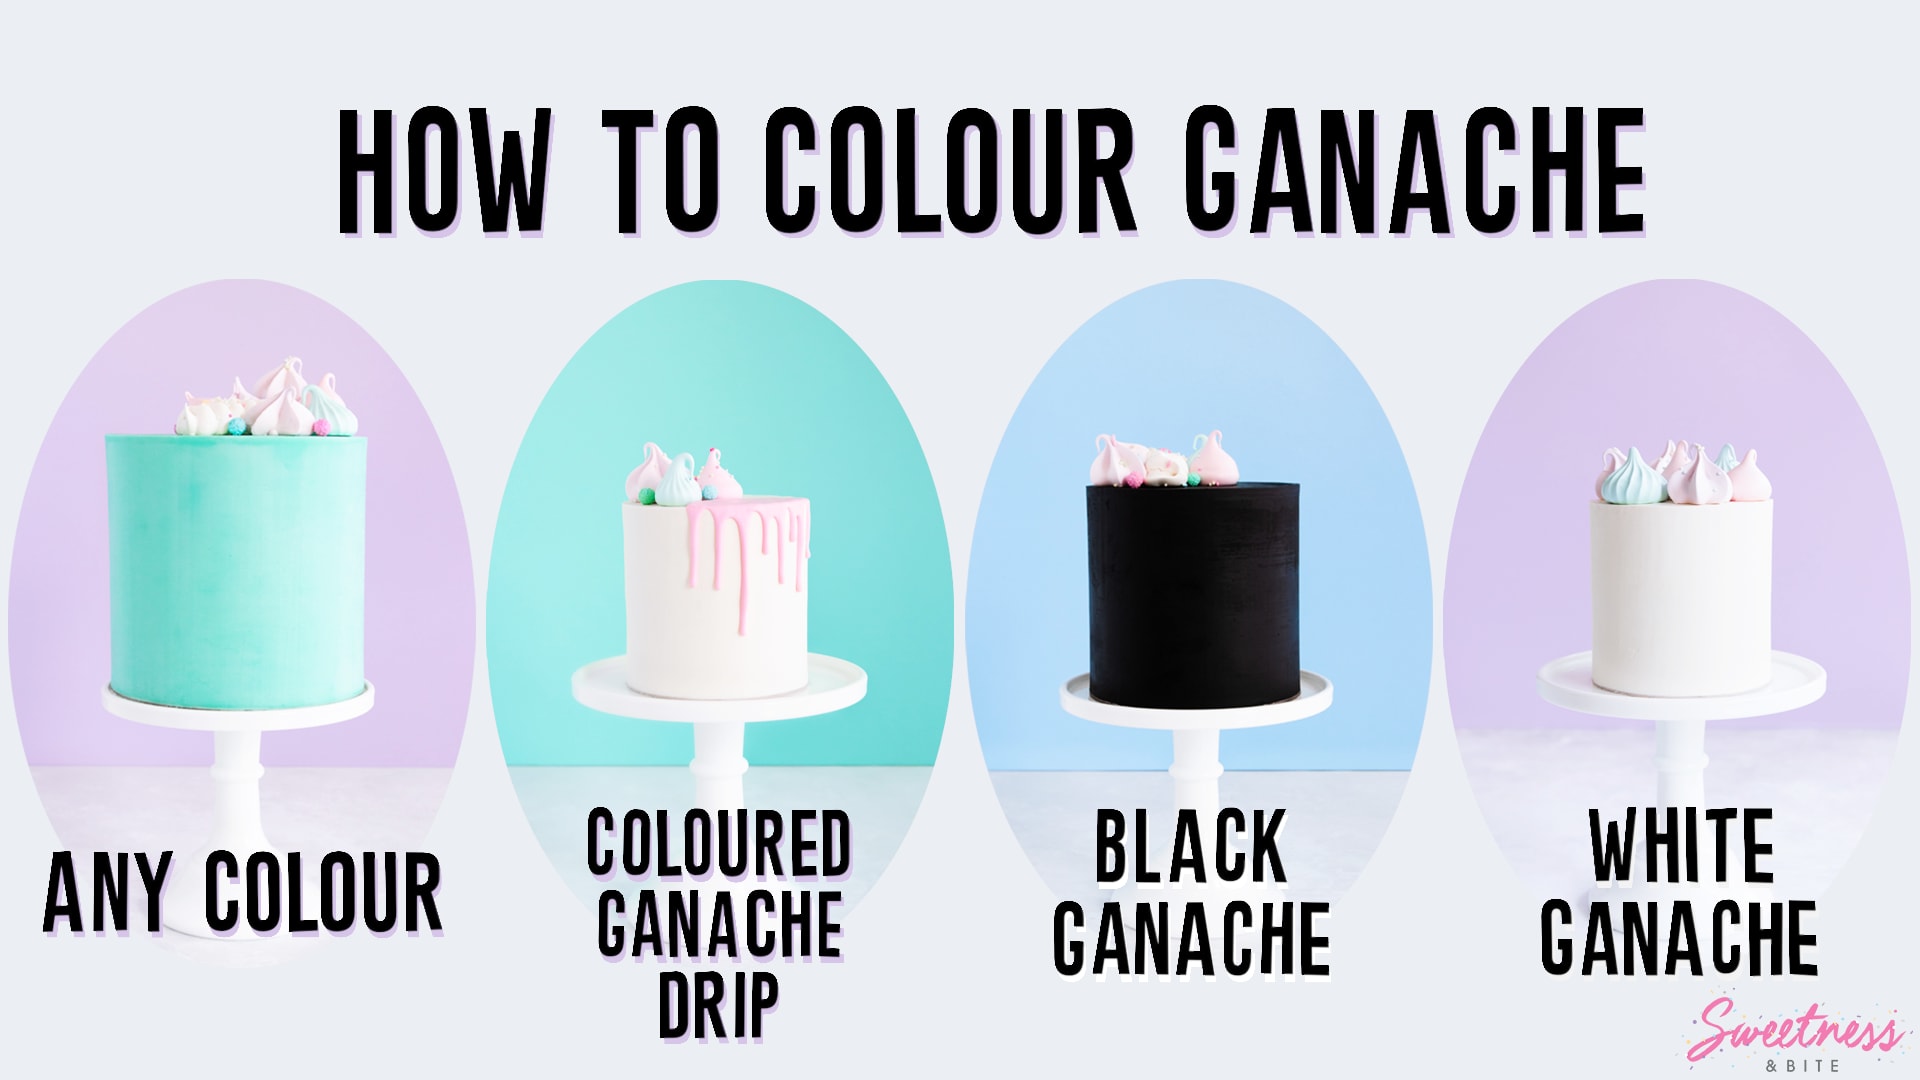 How to Colour Ganache - Ultimate Guide to Making Coloured Ganache!